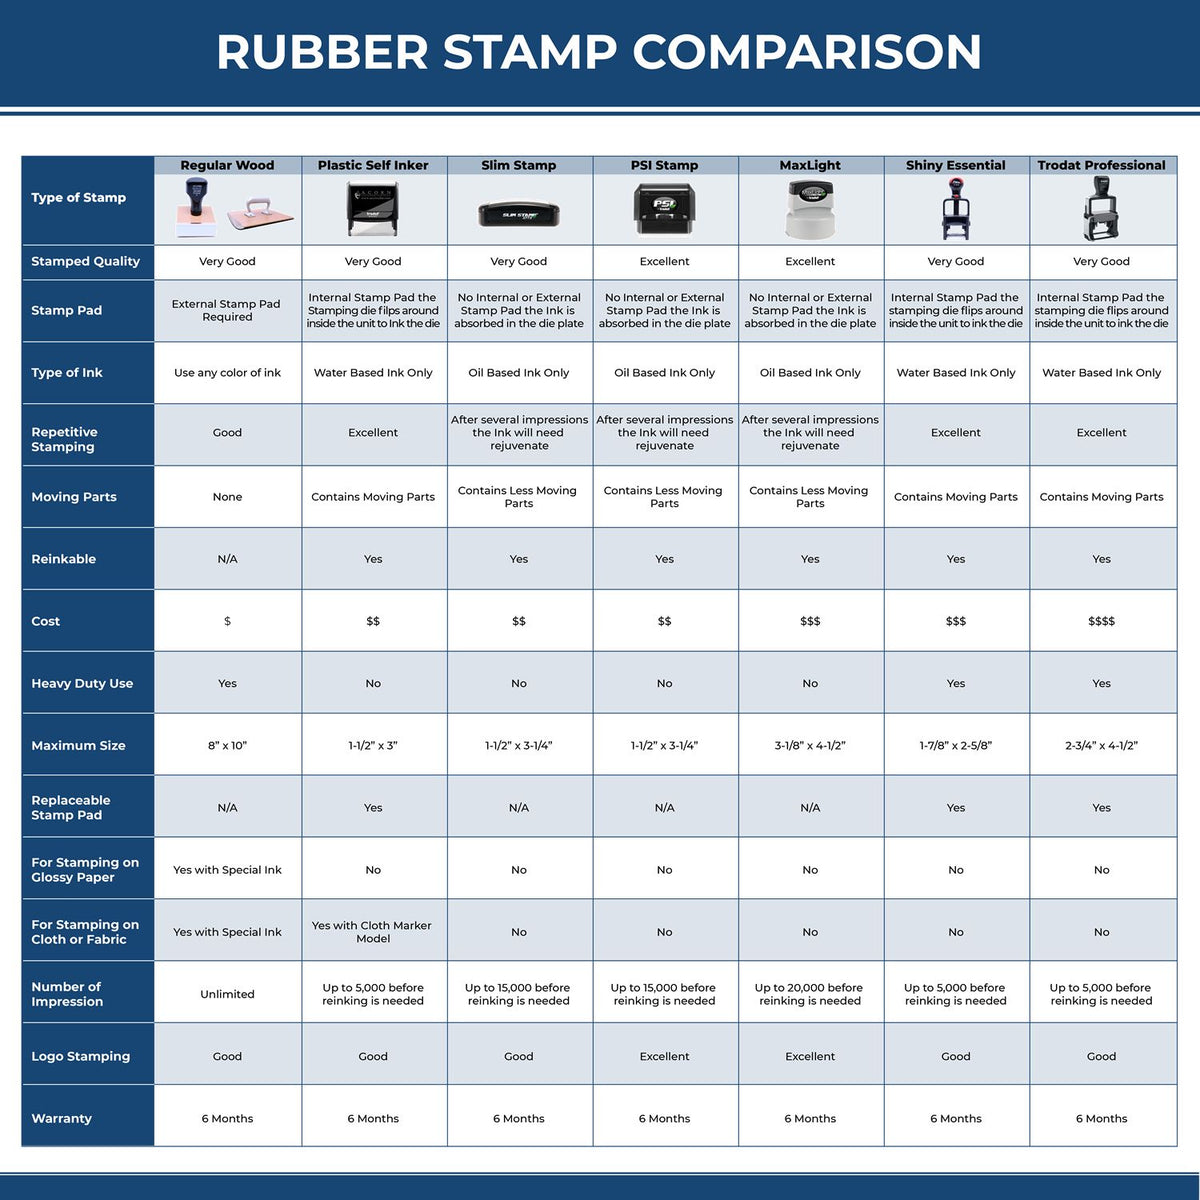 Public Weighmaster Regular Rubber Stamp of Seal 3005WE Rubber Stamp Comparison